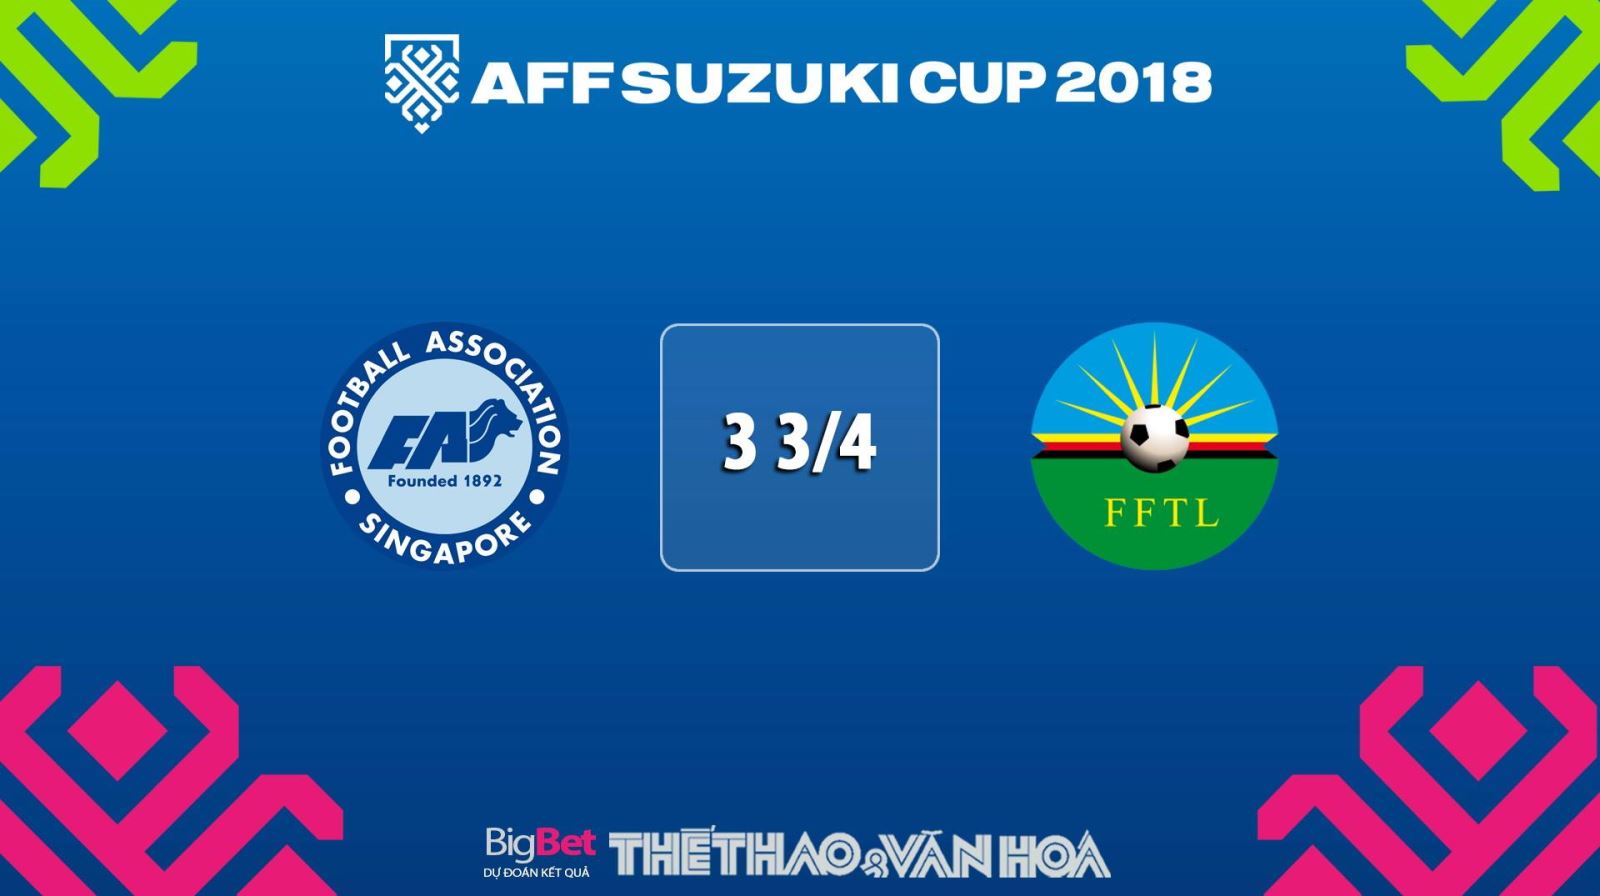 Aff cup, aff cup 2018, trực tiếp aff cup, trực tiếp aff cup 2018, xem truc tiep aff cup, xem truc tiep aff cup 2018